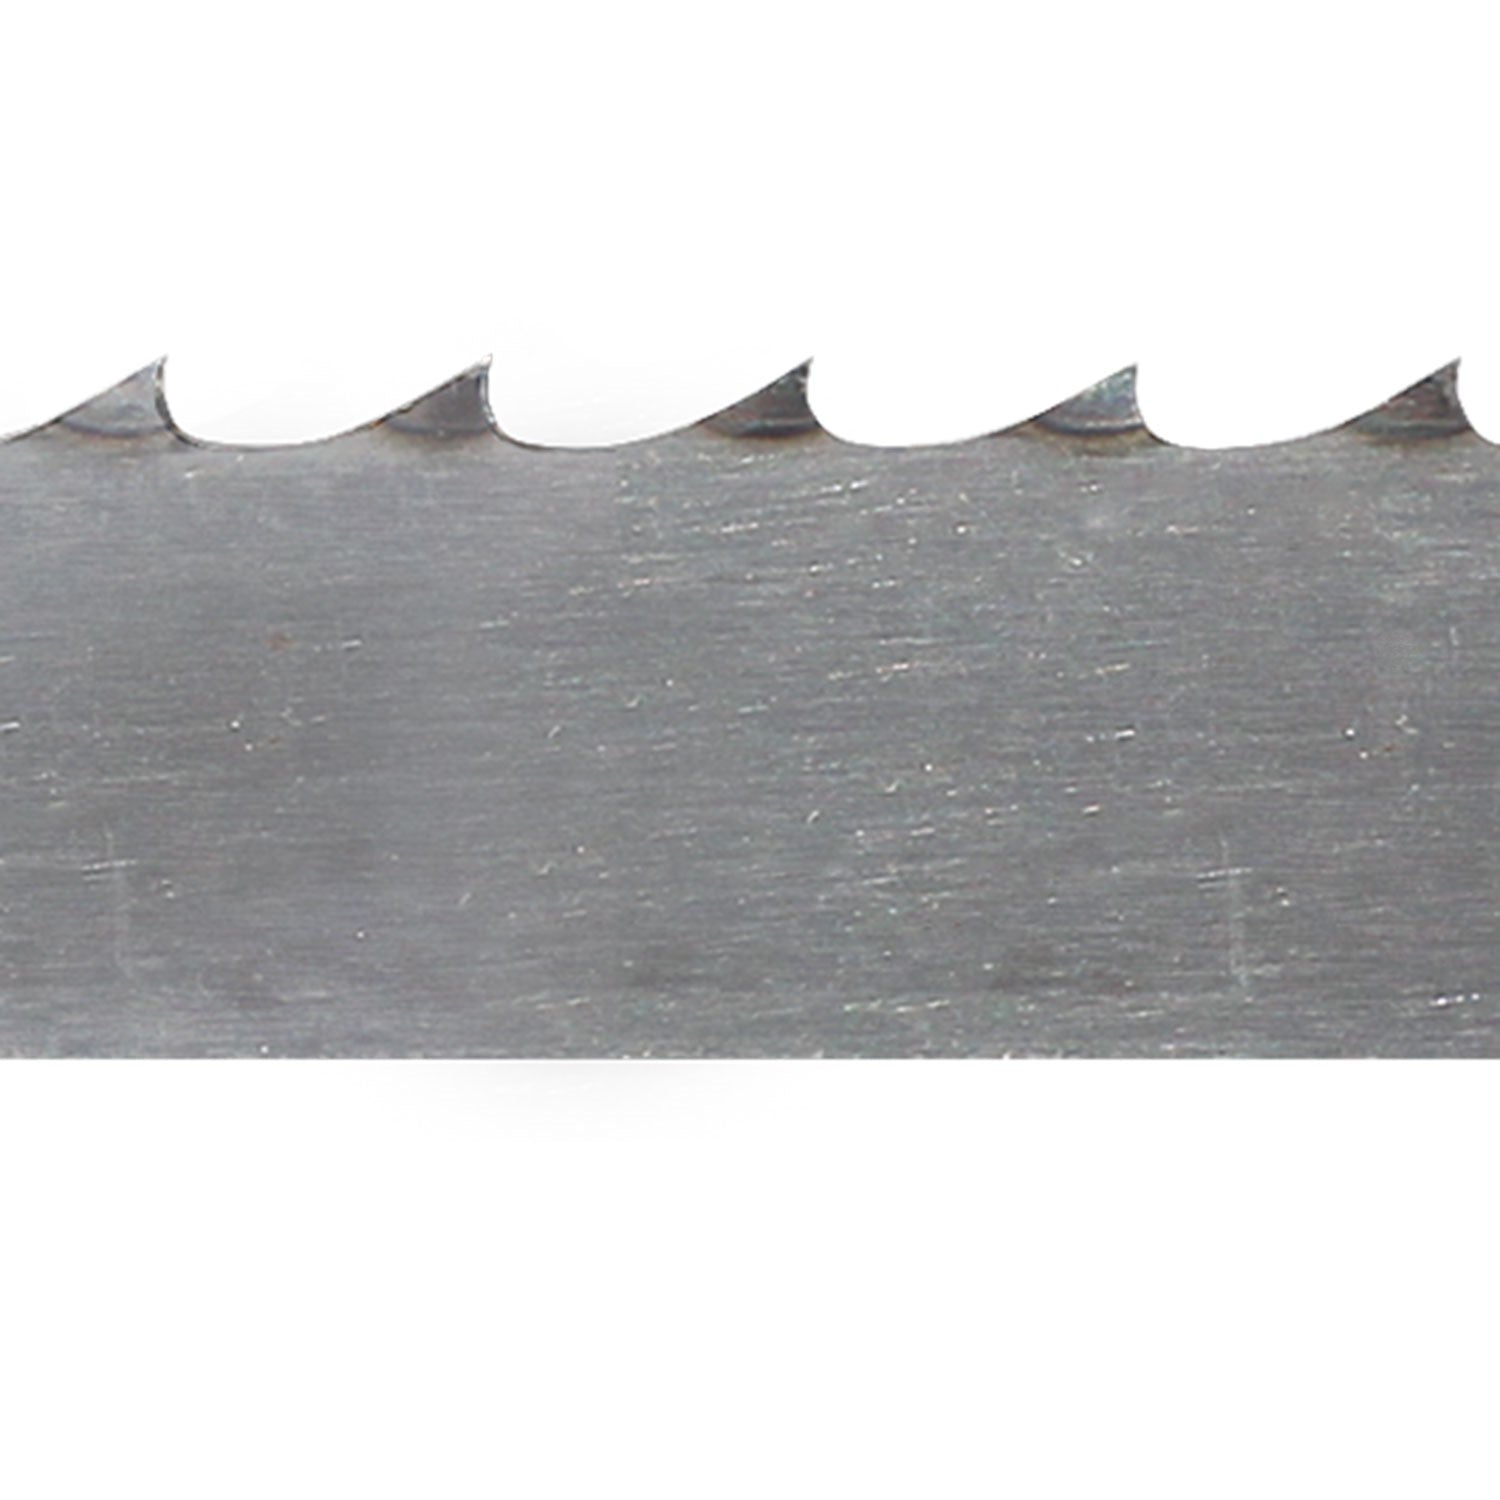 Meat Band Saw Blade - One Way® Portion Control - 108 in. x 5/8 in. x 0.022 in. x 3 TPI - Pack of 4